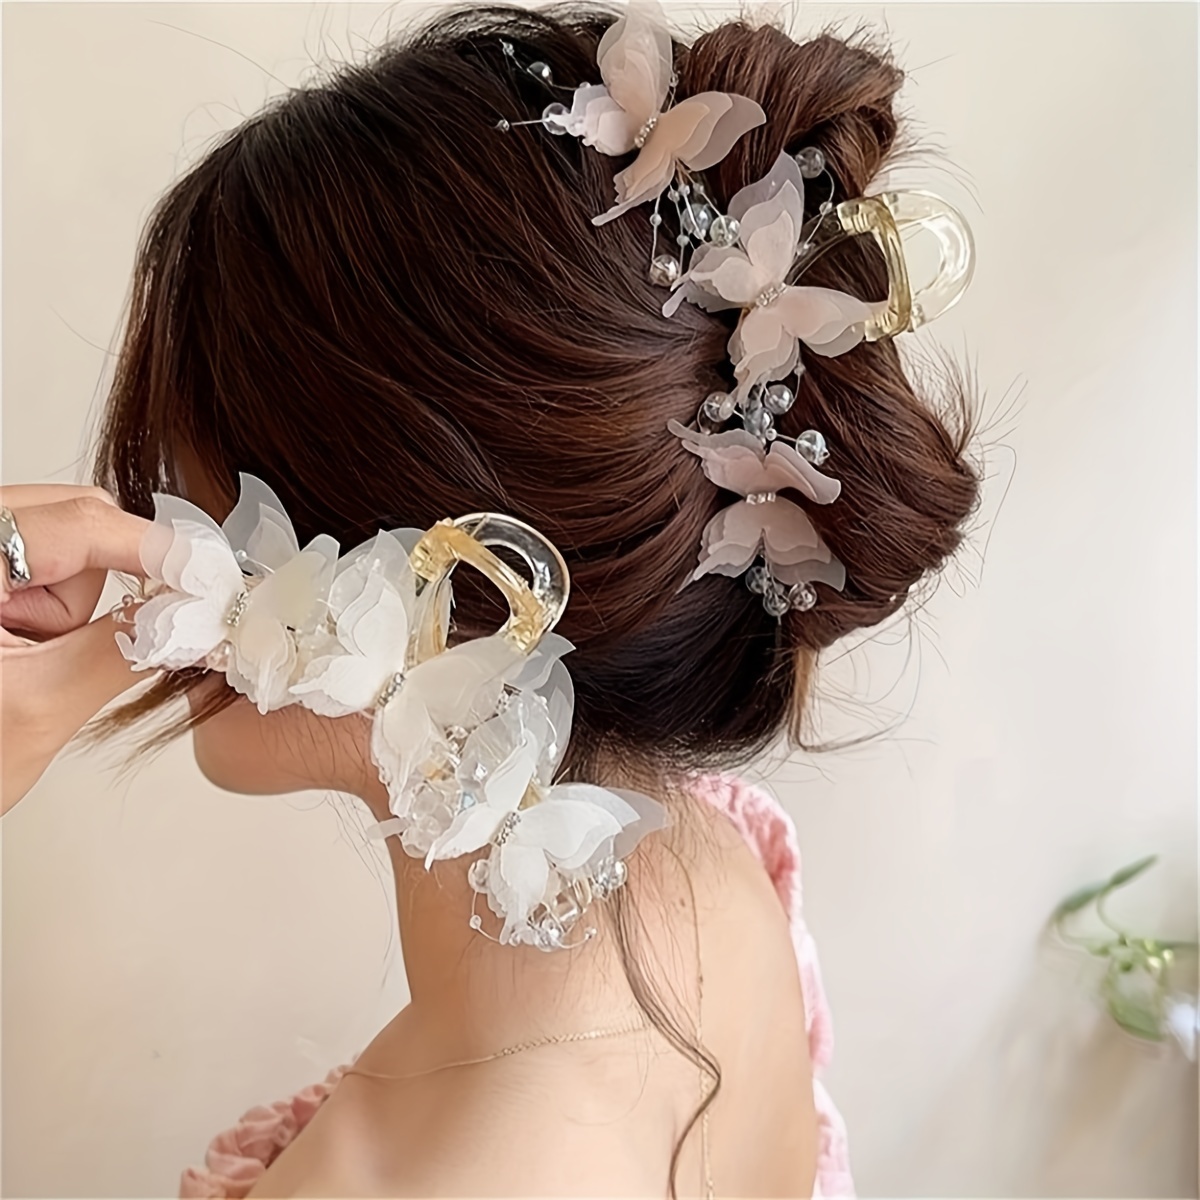 

Elegant Butterfly Bow Hair Claw Clip - Resin, Non-slip Grip For Women & Girls, Cute Ponytail Holder Accessory